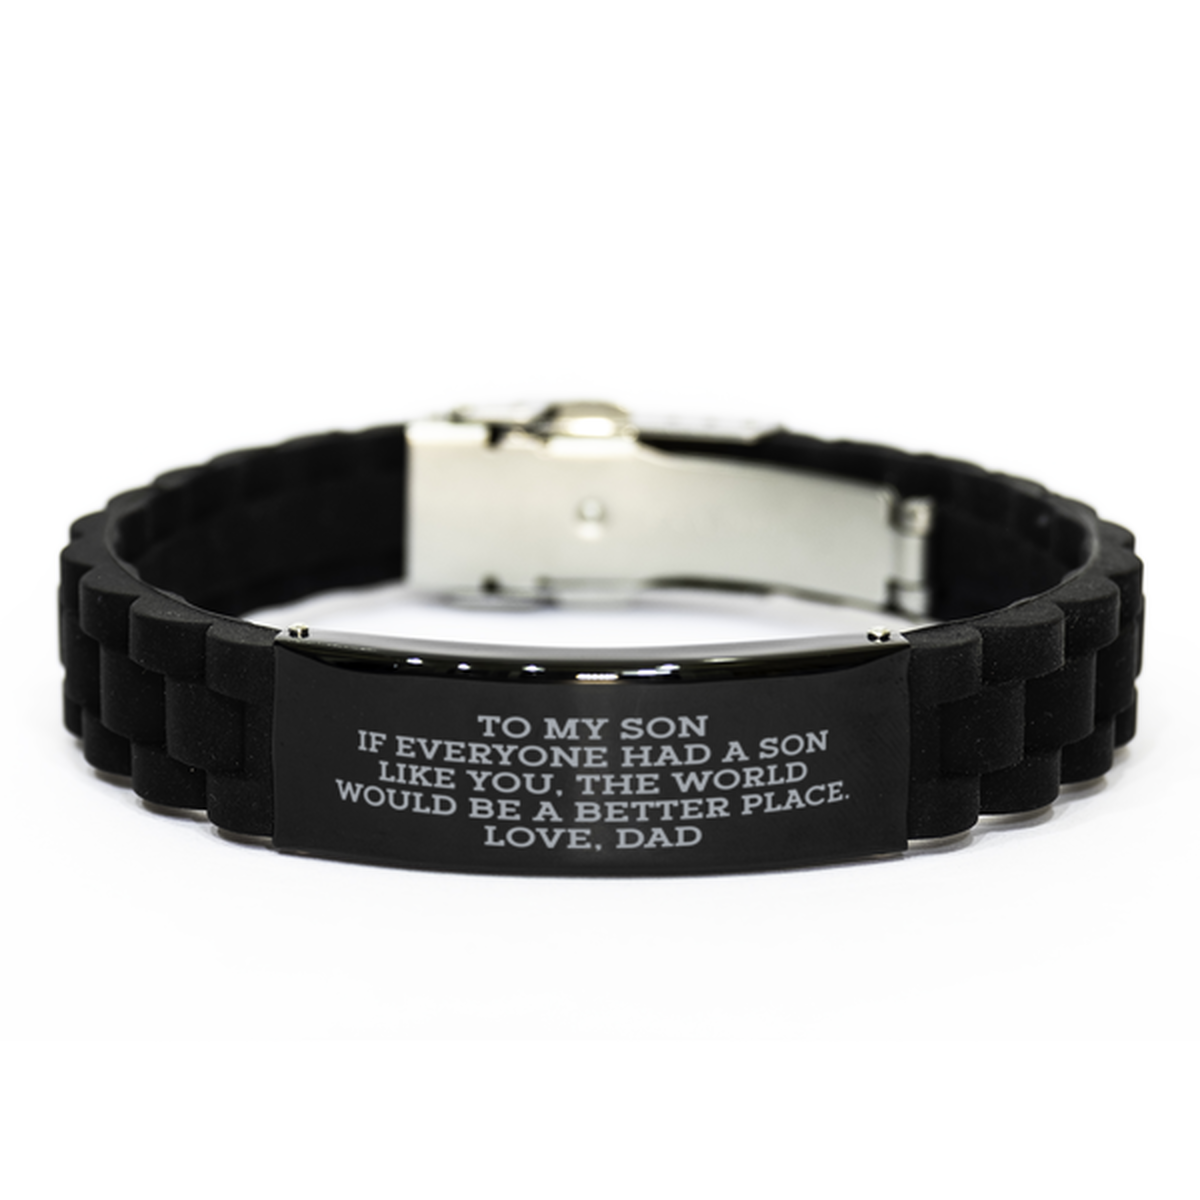 To My Son Black Bracelet, If Everyone Had A Son Like You, Graduation Day Gifts For Son From Dad, Birthday Gifts For Men